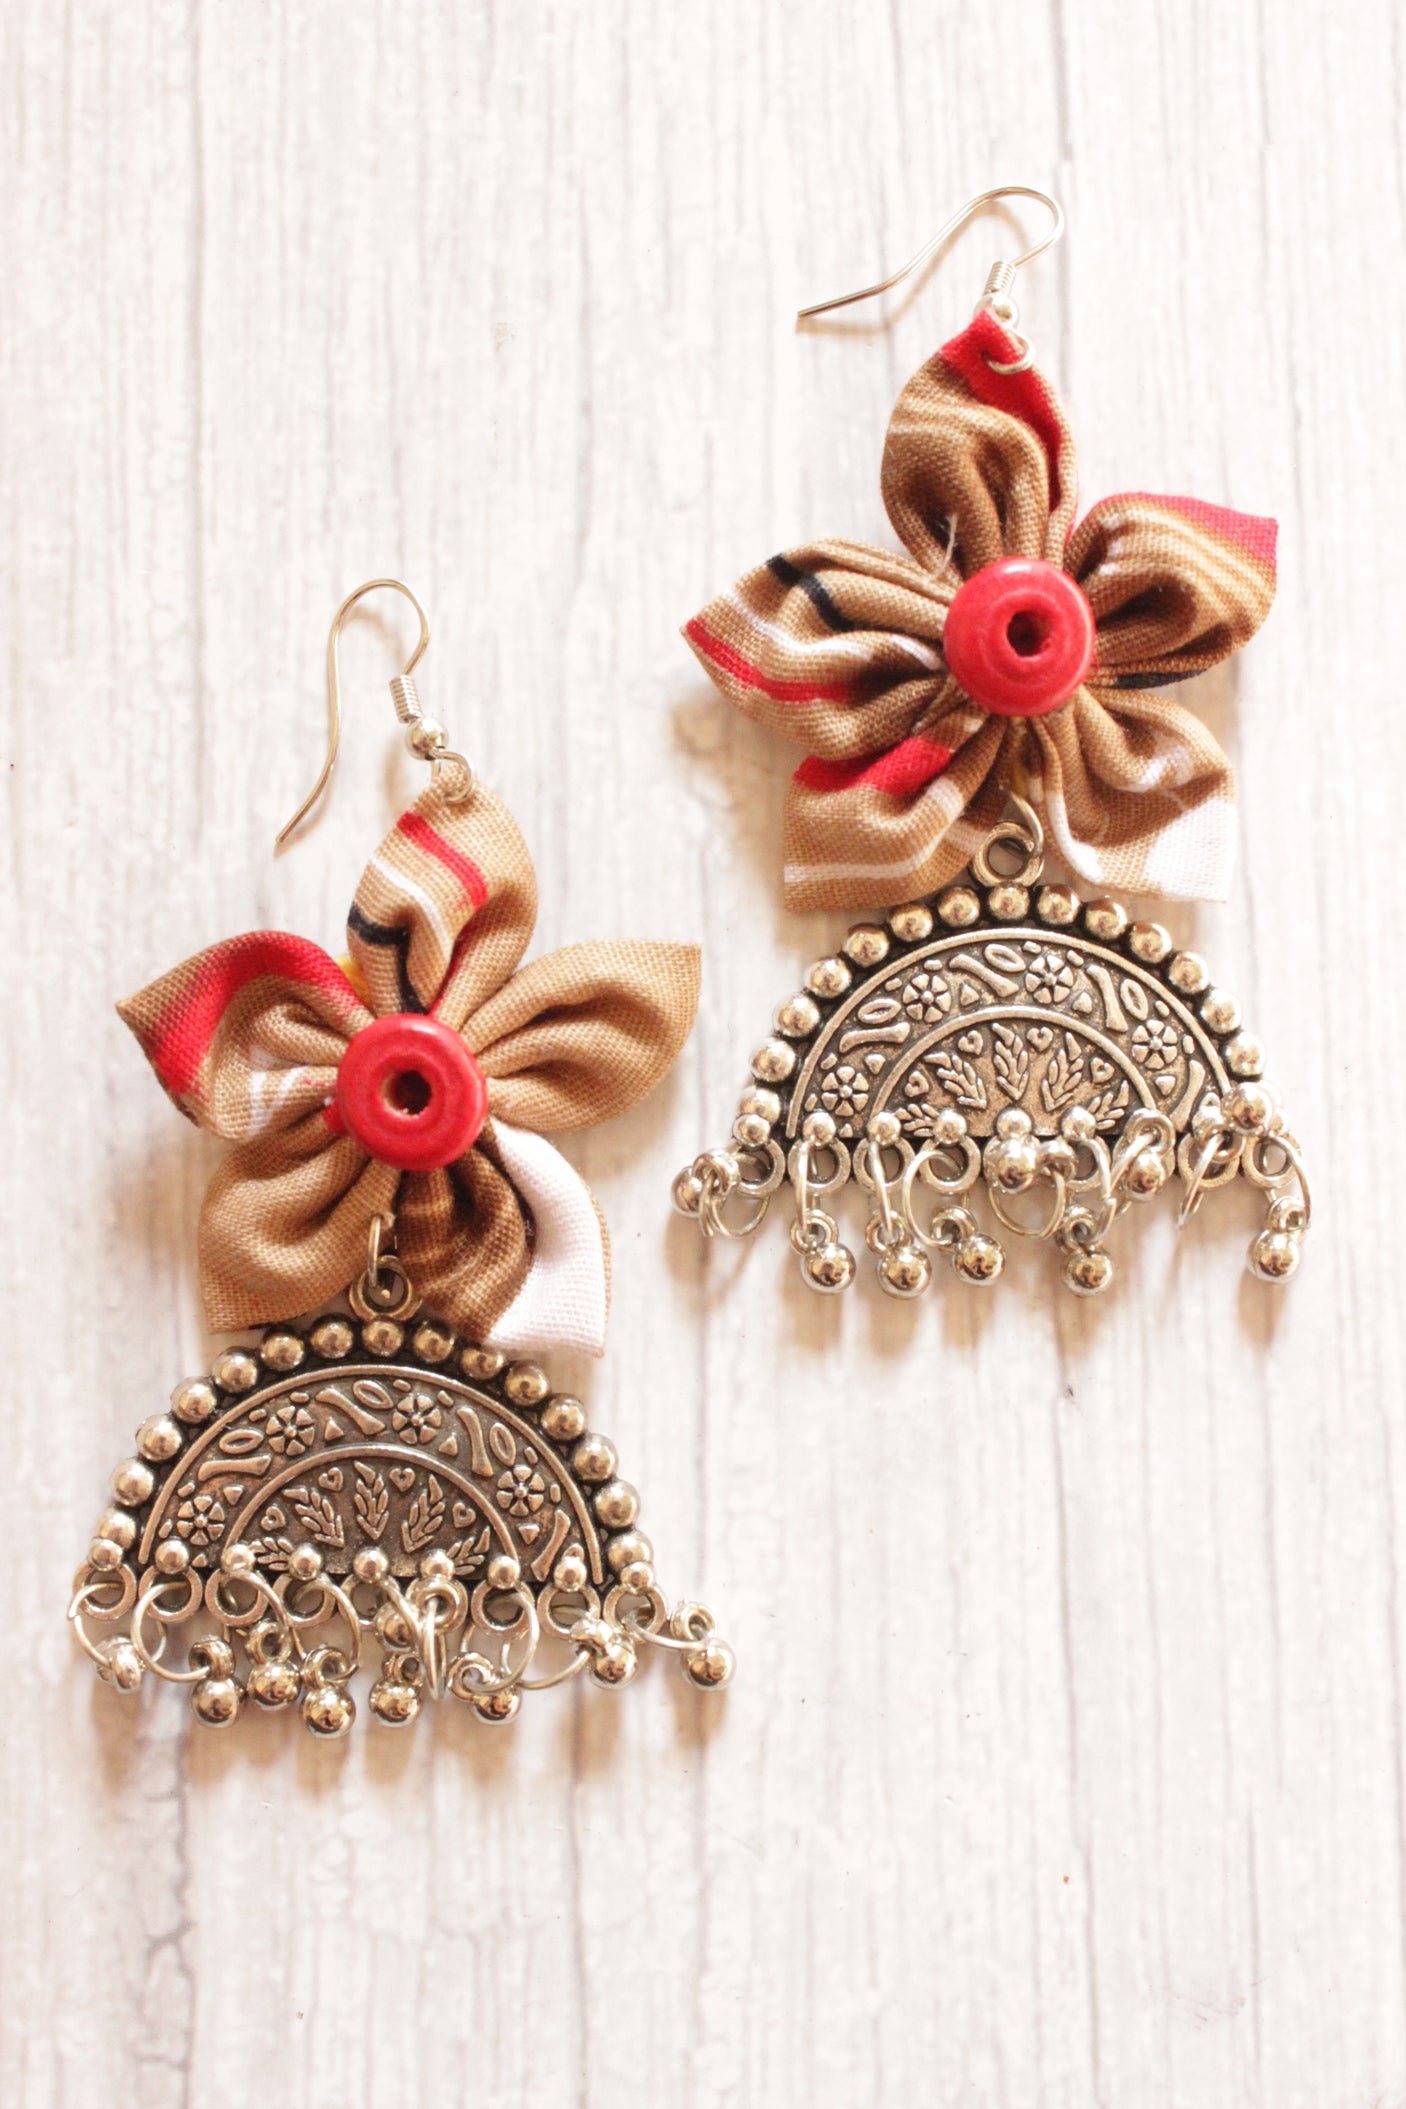 Brown & Red Handmade Fabric Flower Earrings with Dome Shaped Metal Accent